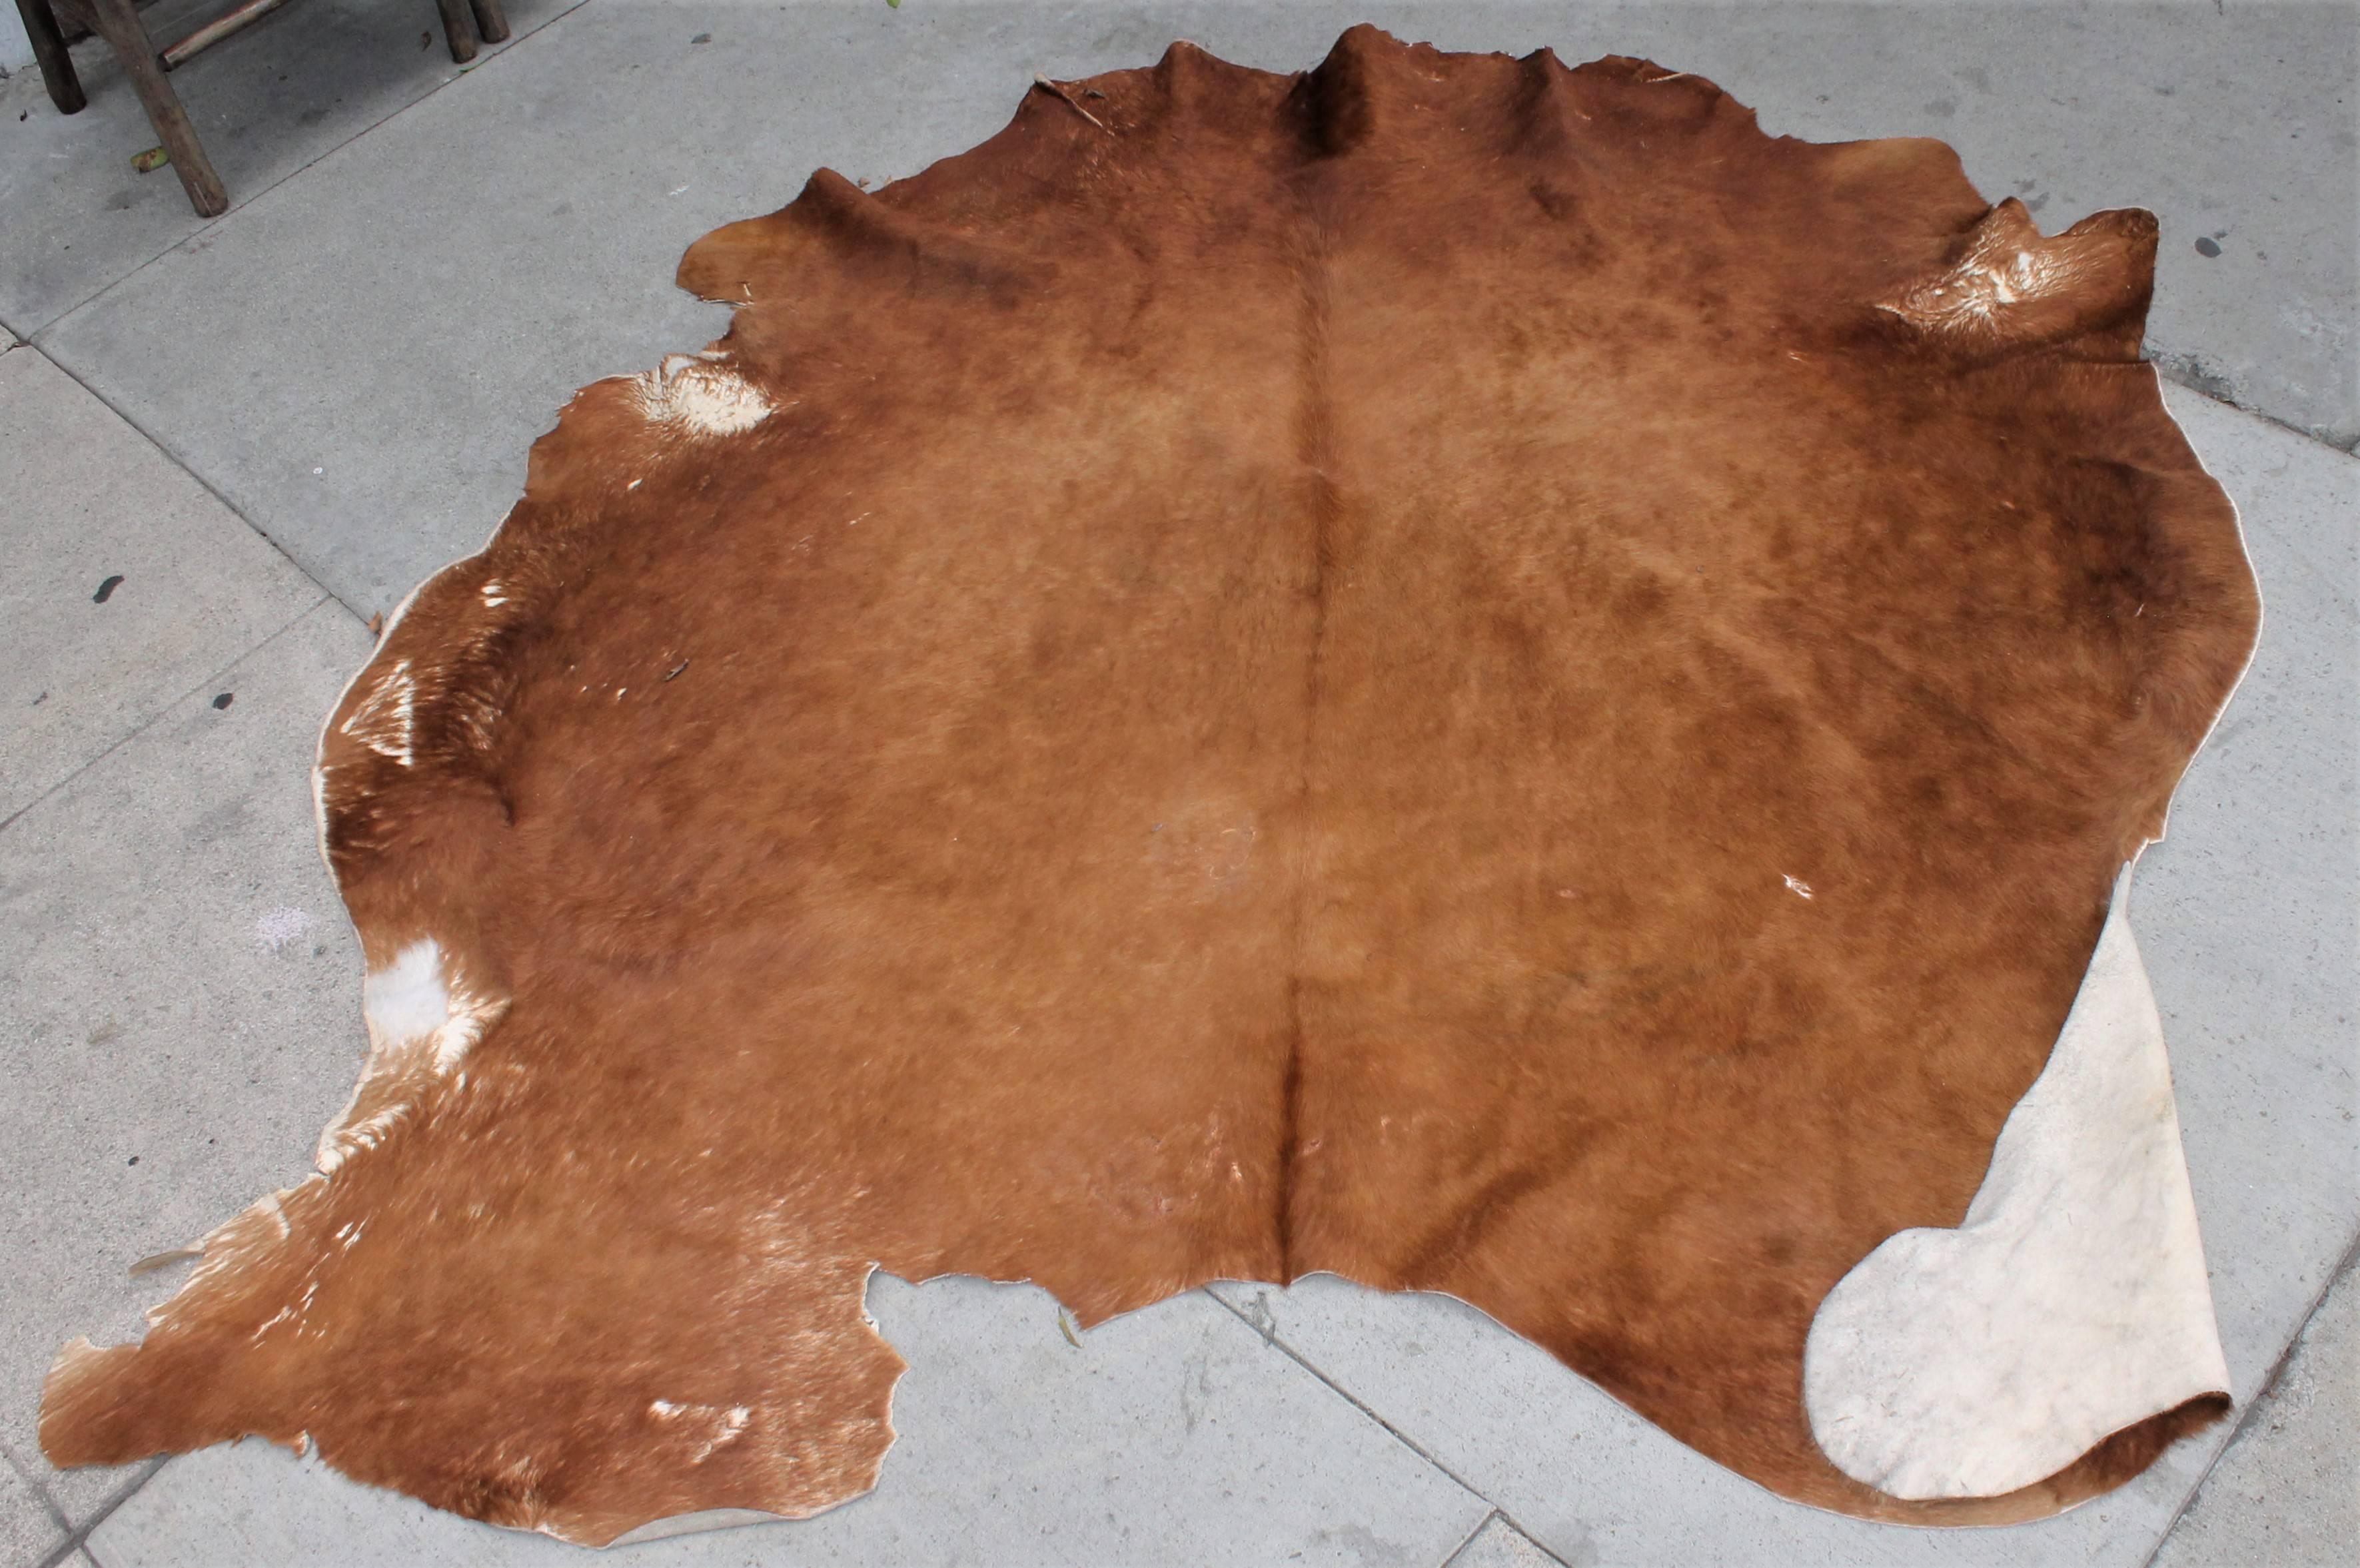 This large full size cow hide is in great as found condition. It has branding marks on it. It is a real mellow shade of camel color.